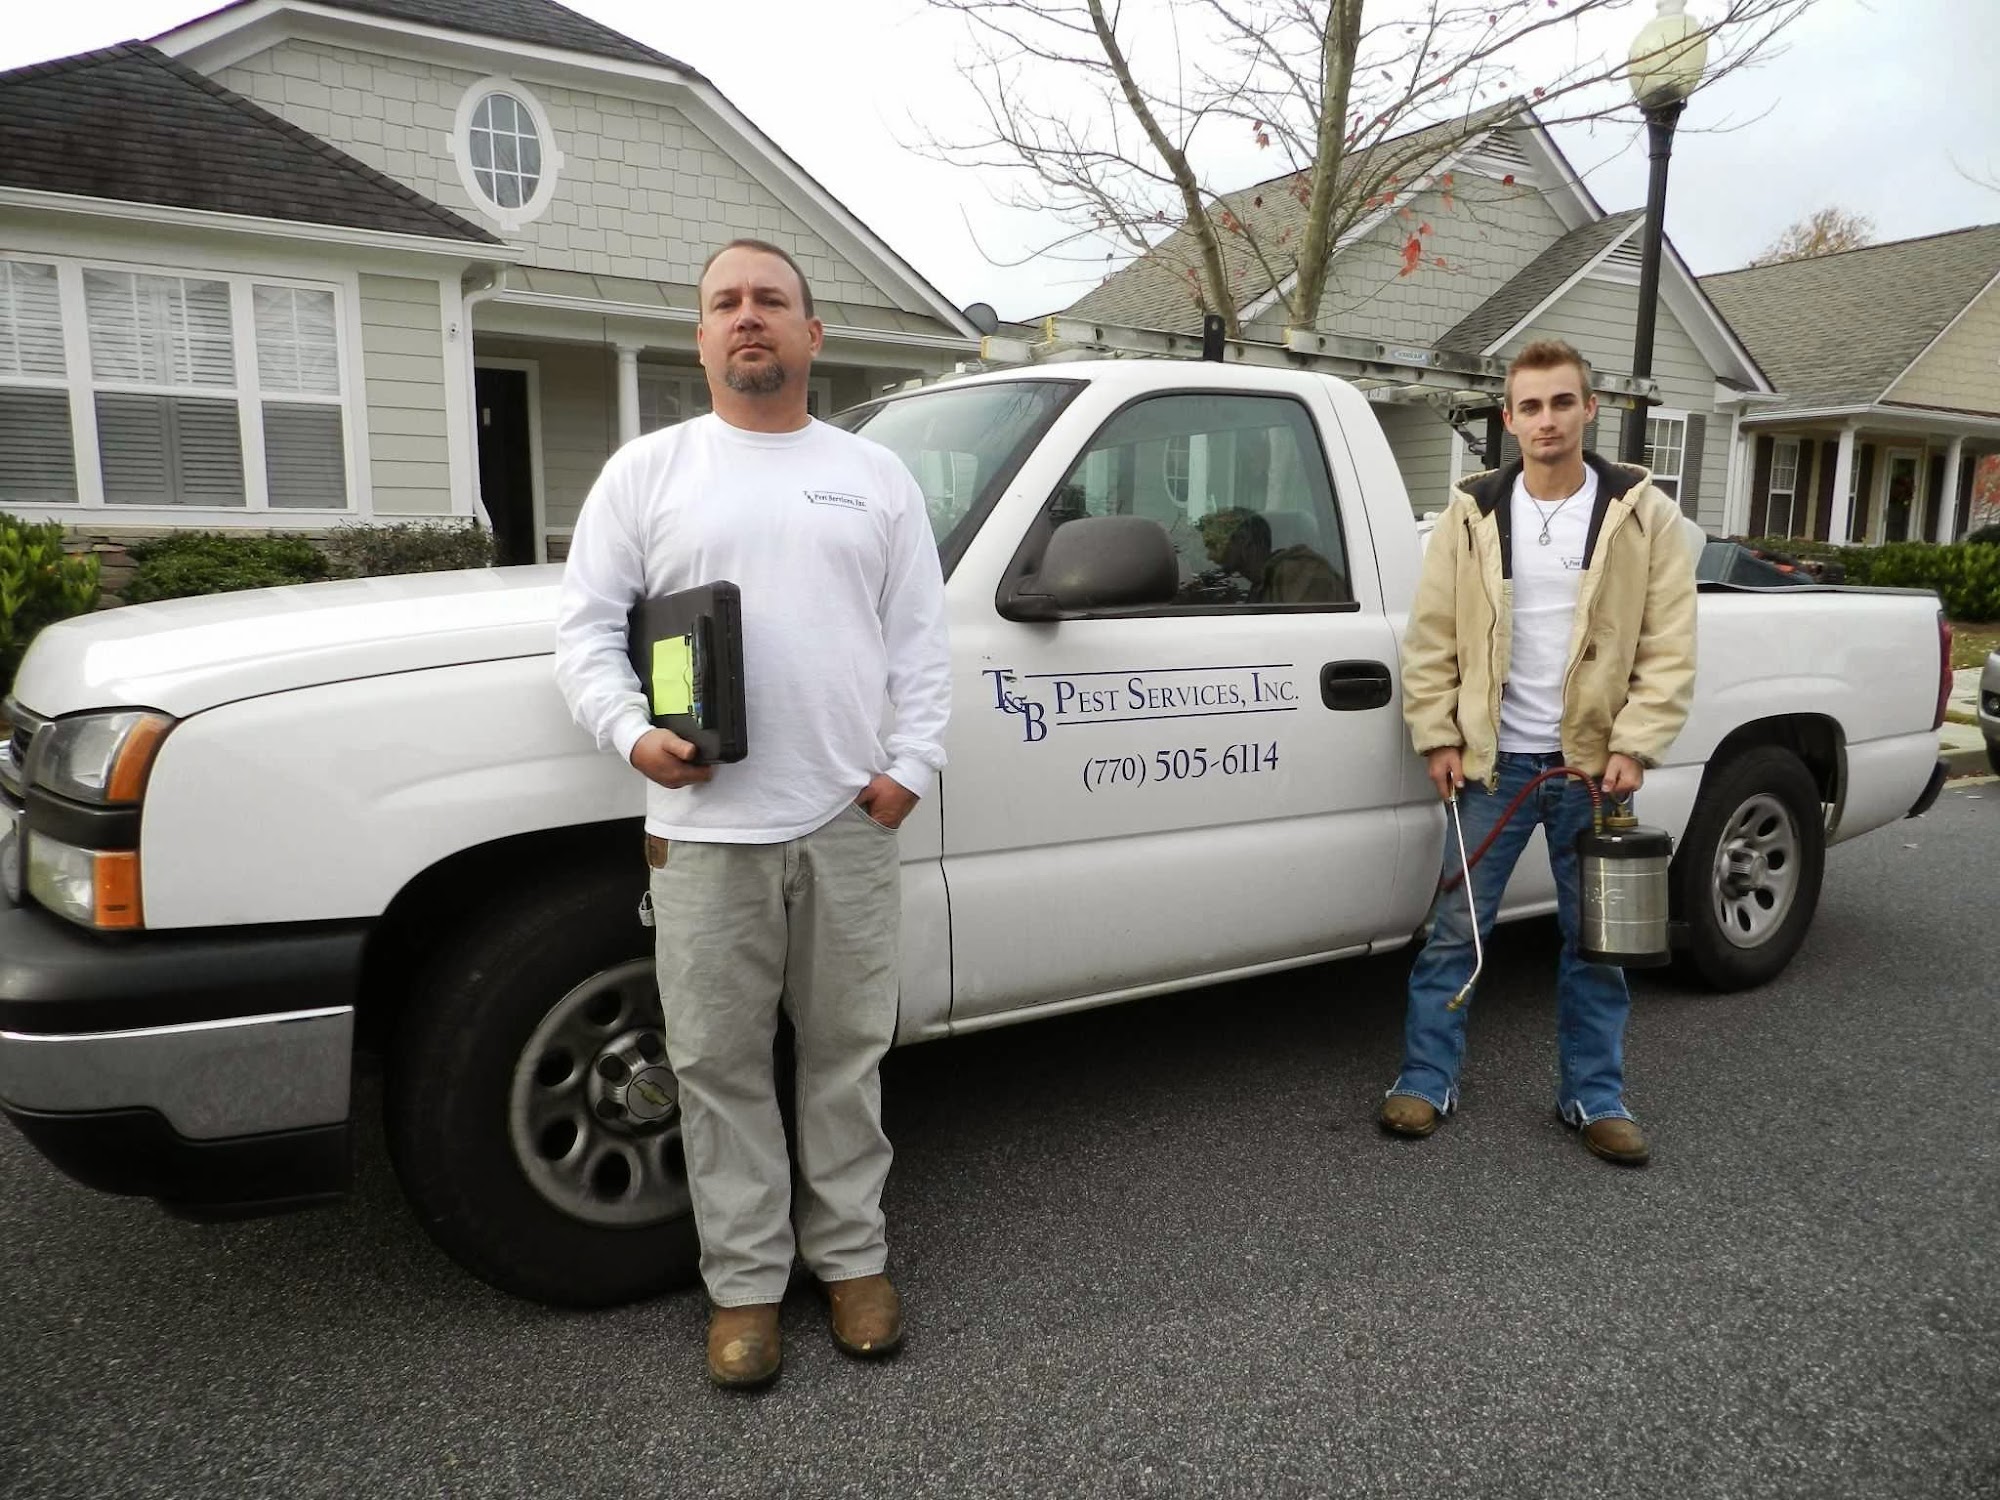 T and B Pest Services